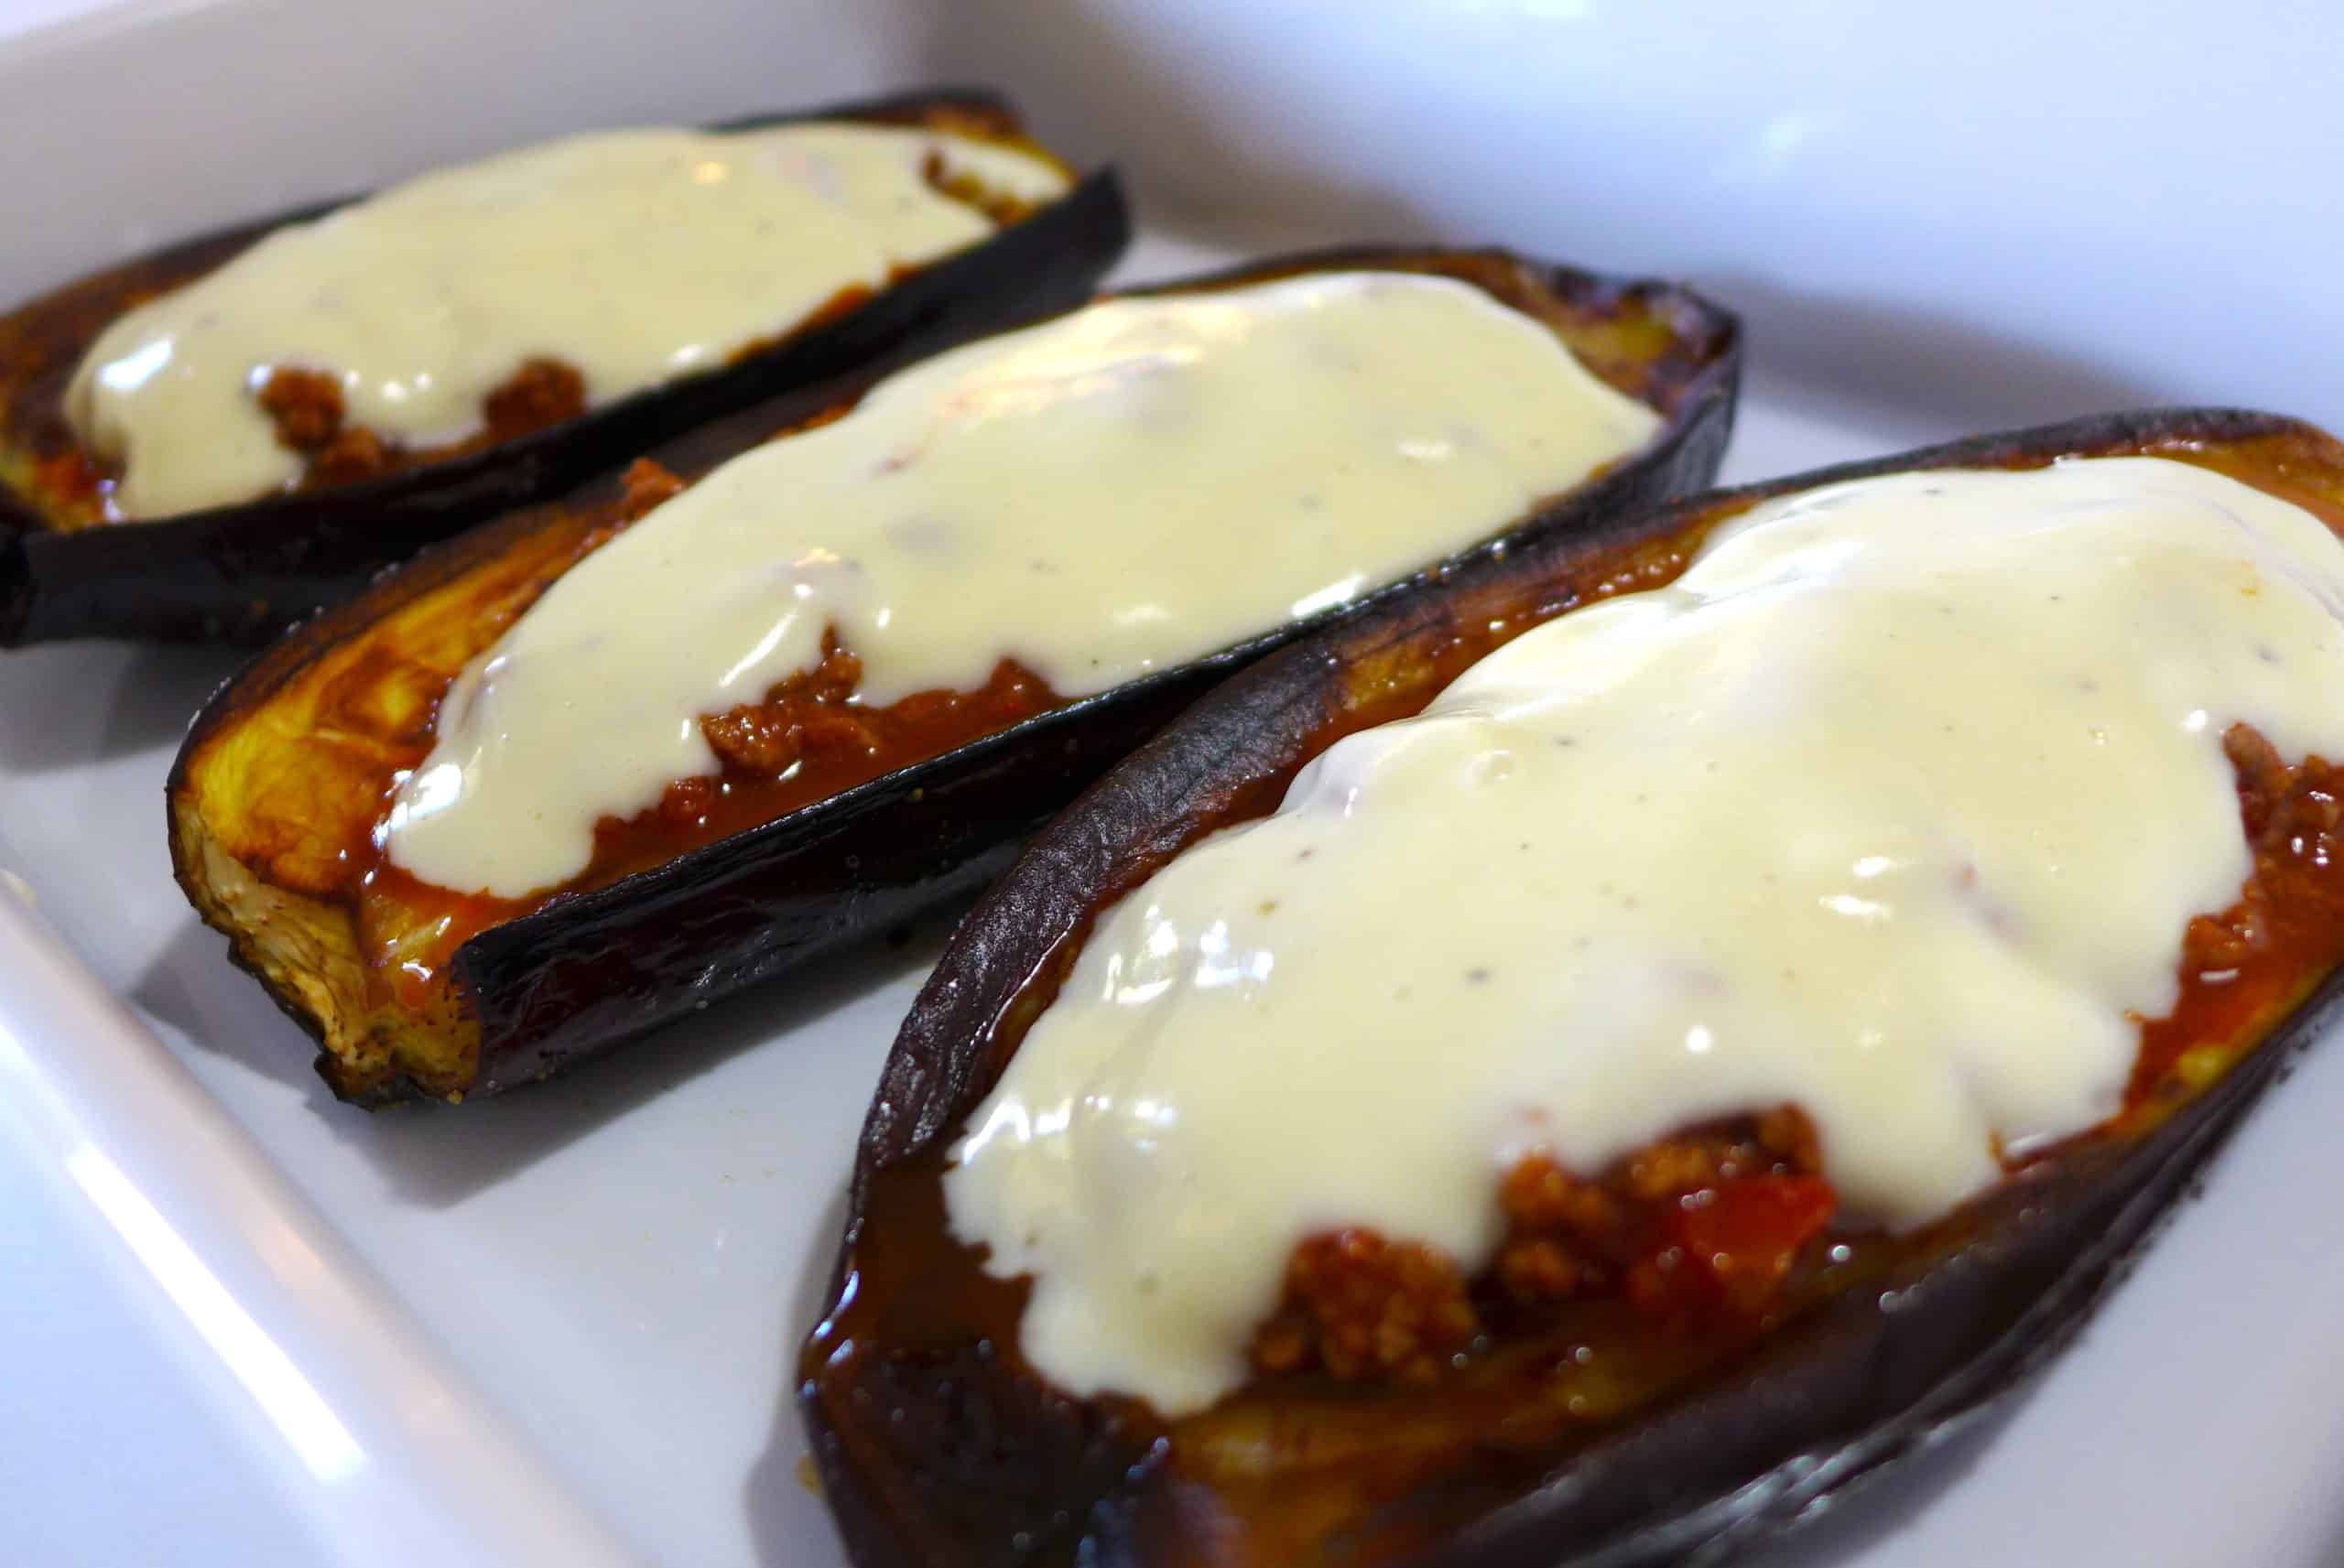 greek stuffed eggplant in a white casserole dish topped with creamy Béchamel sauce and mashed potatoes